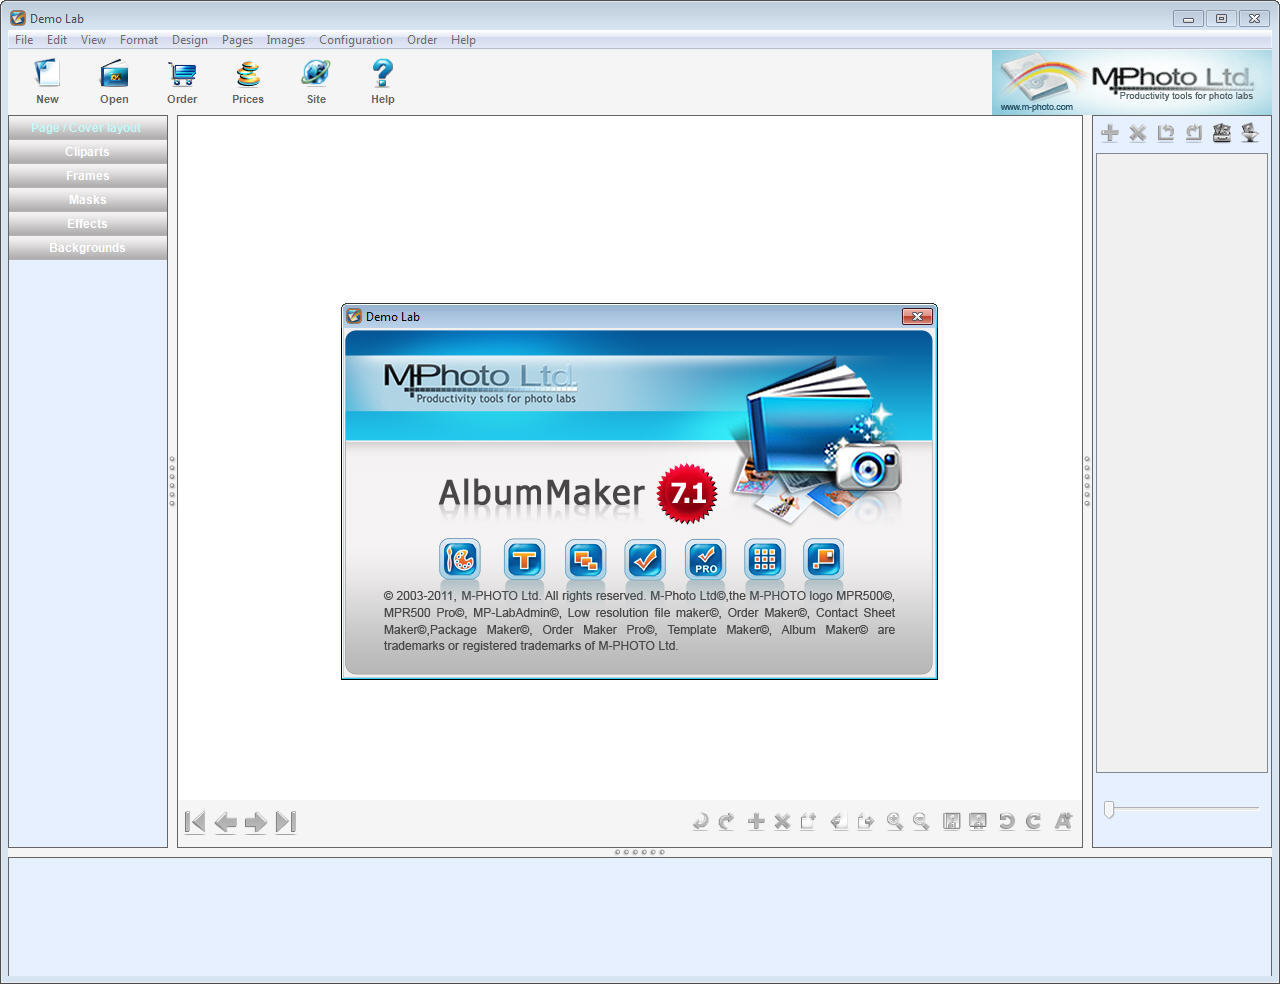 album maker software free download full version with key